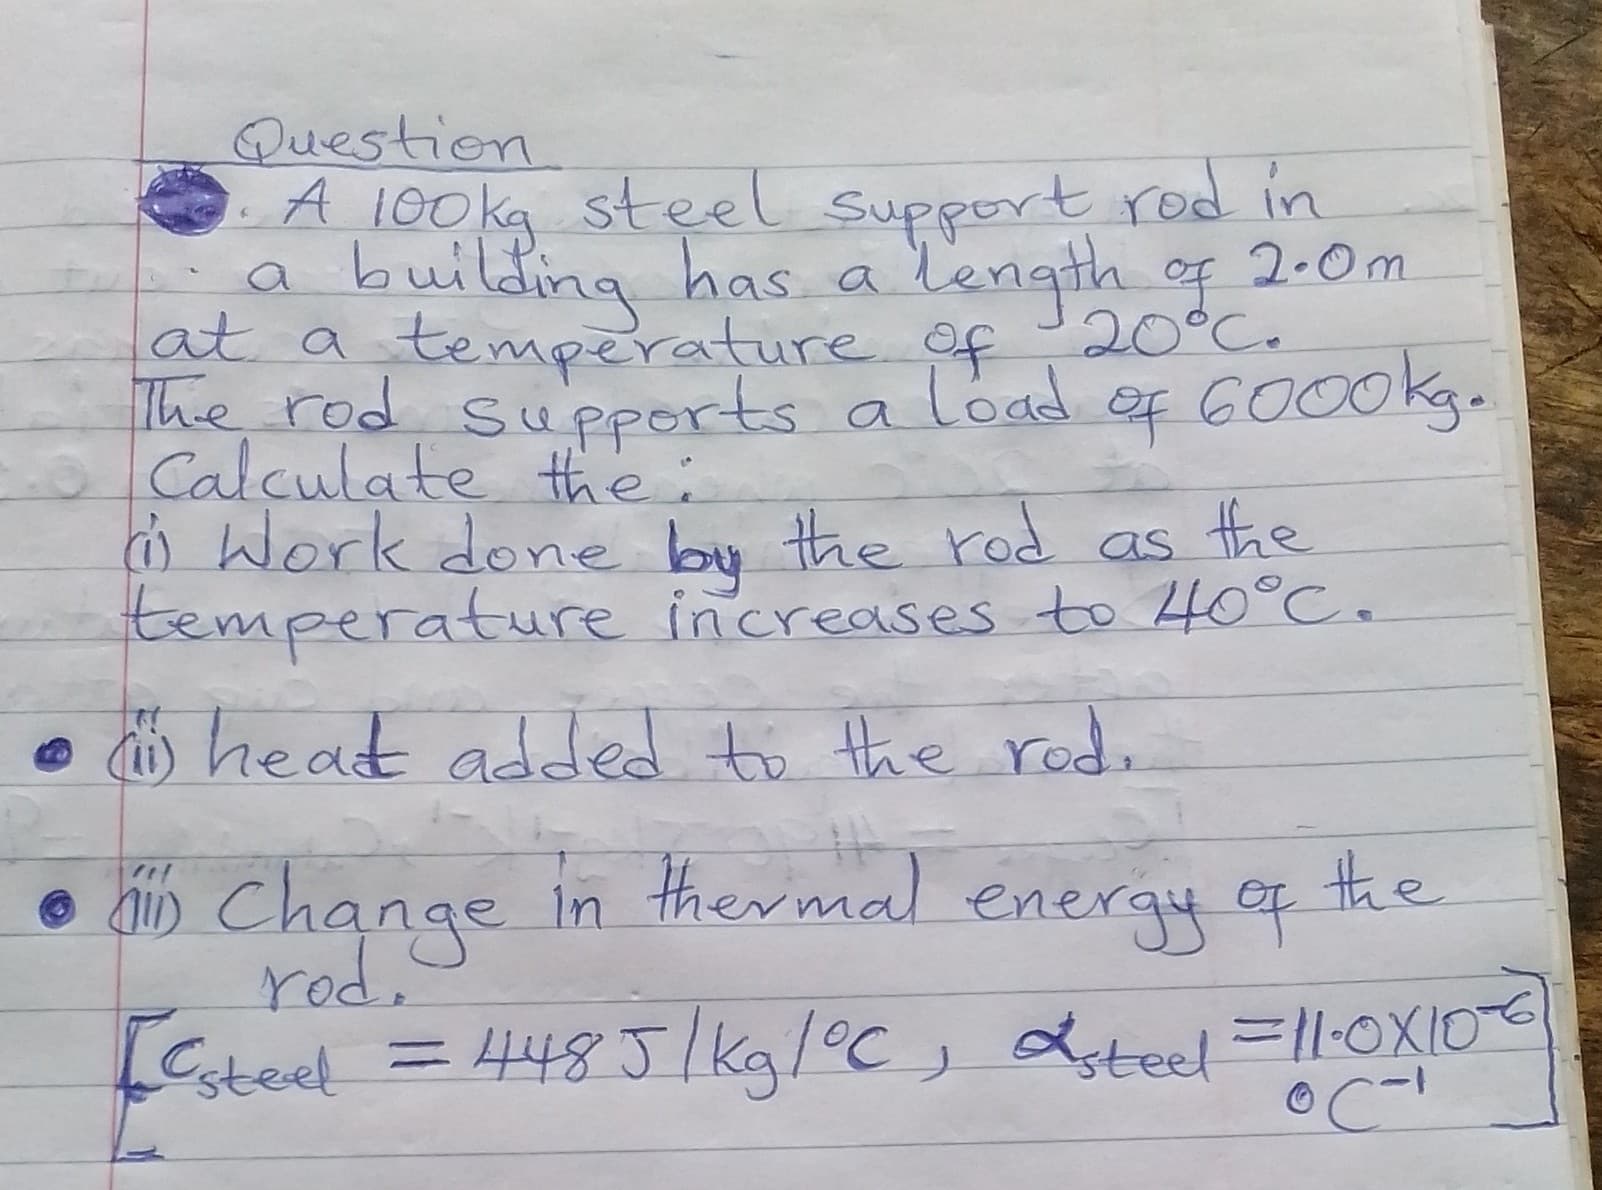 A 100kg steel support rod in
a building has a l'ength of 2.0m
at a temperature of 20°C.
The rod supports a load ef 6000kg.
Calculate the:
o Work doe bu the rod as the
temperature increases to 40°C.
ö heat added to the rod.
the
his Change in thermal energy e
rod,
f
